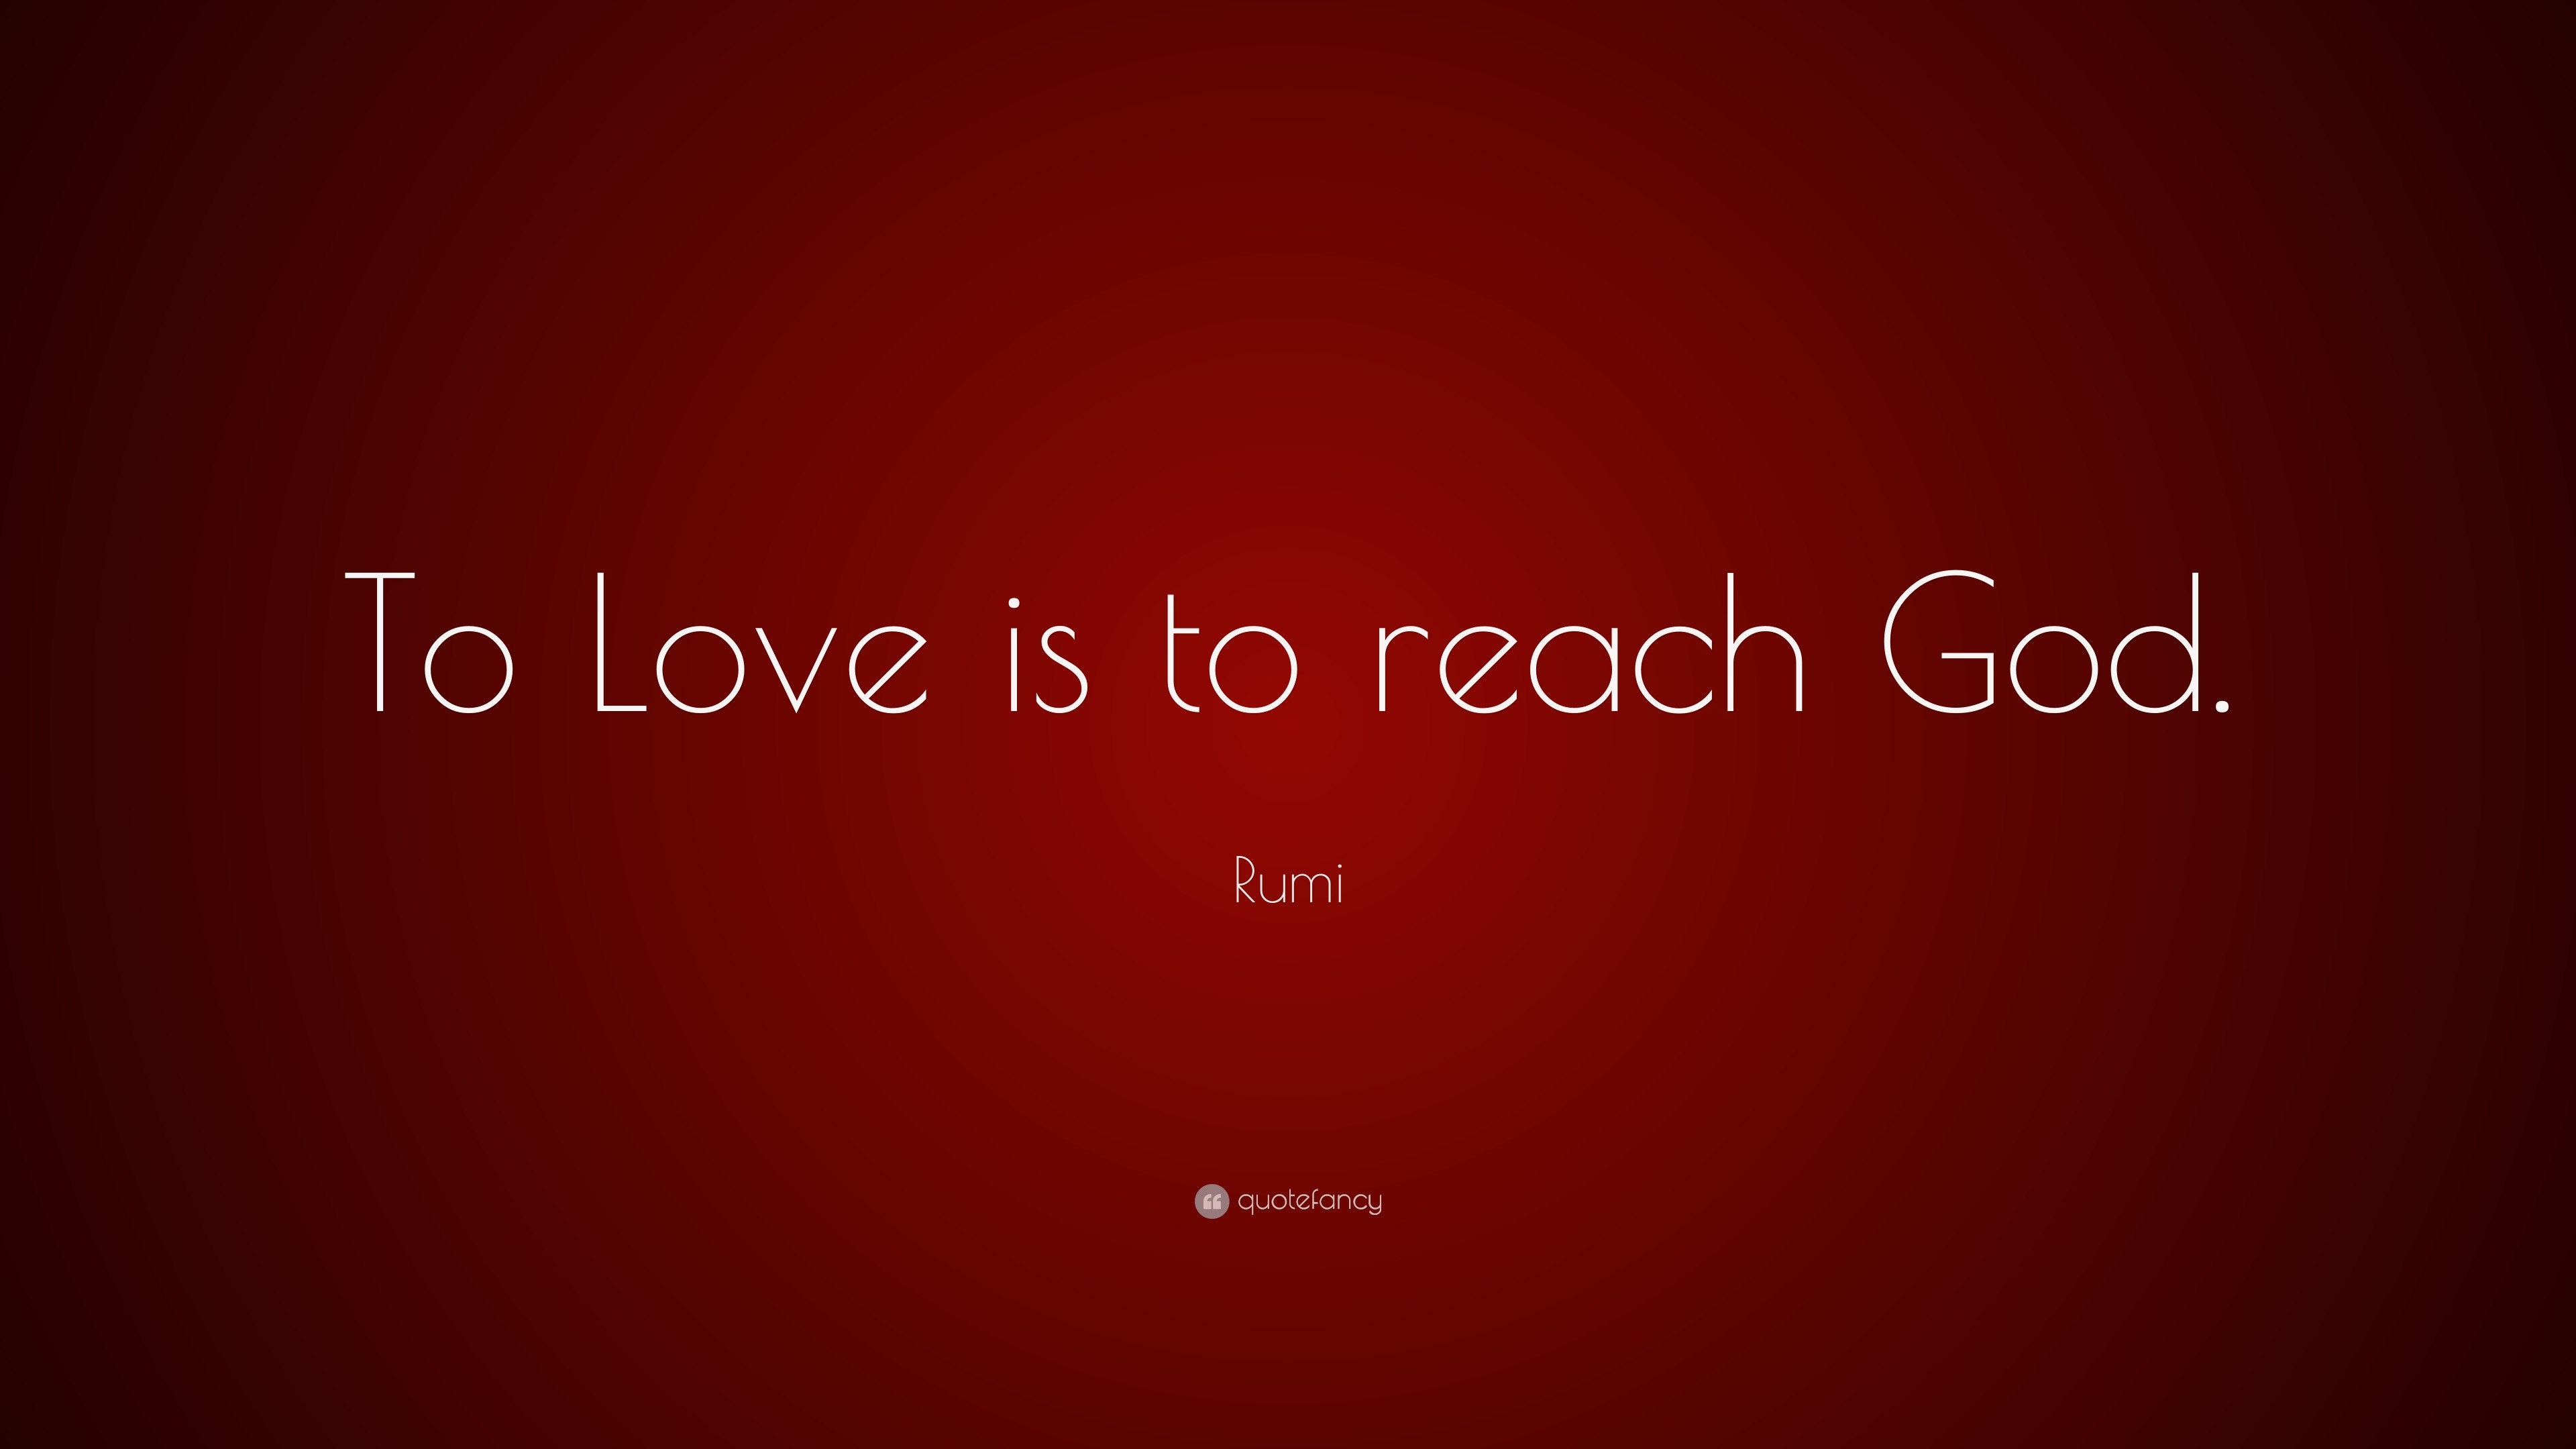 Rumi Quote: "To Love is to reach God."